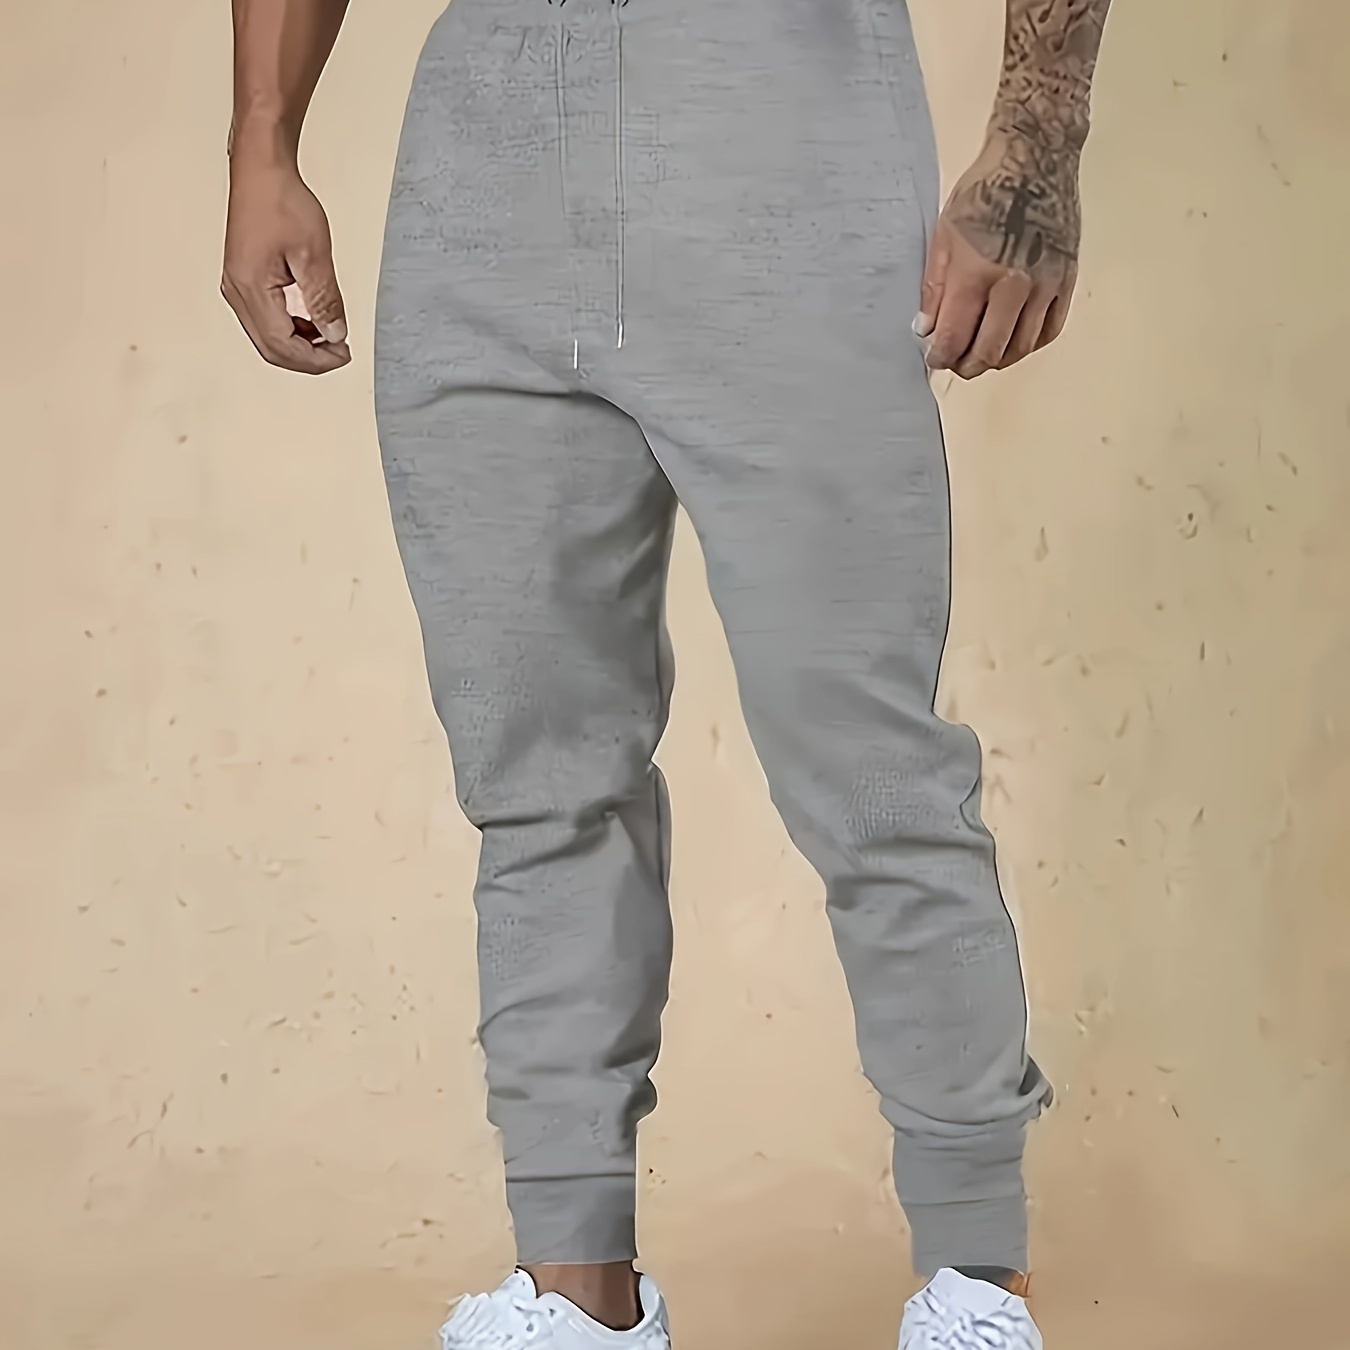 

Casual And Chic Men's Solid Regular Fit And Cuffed Sweatpants, Trousers With Drawstring And Pockets Versatile For Jogging, Running And Fitness Wear